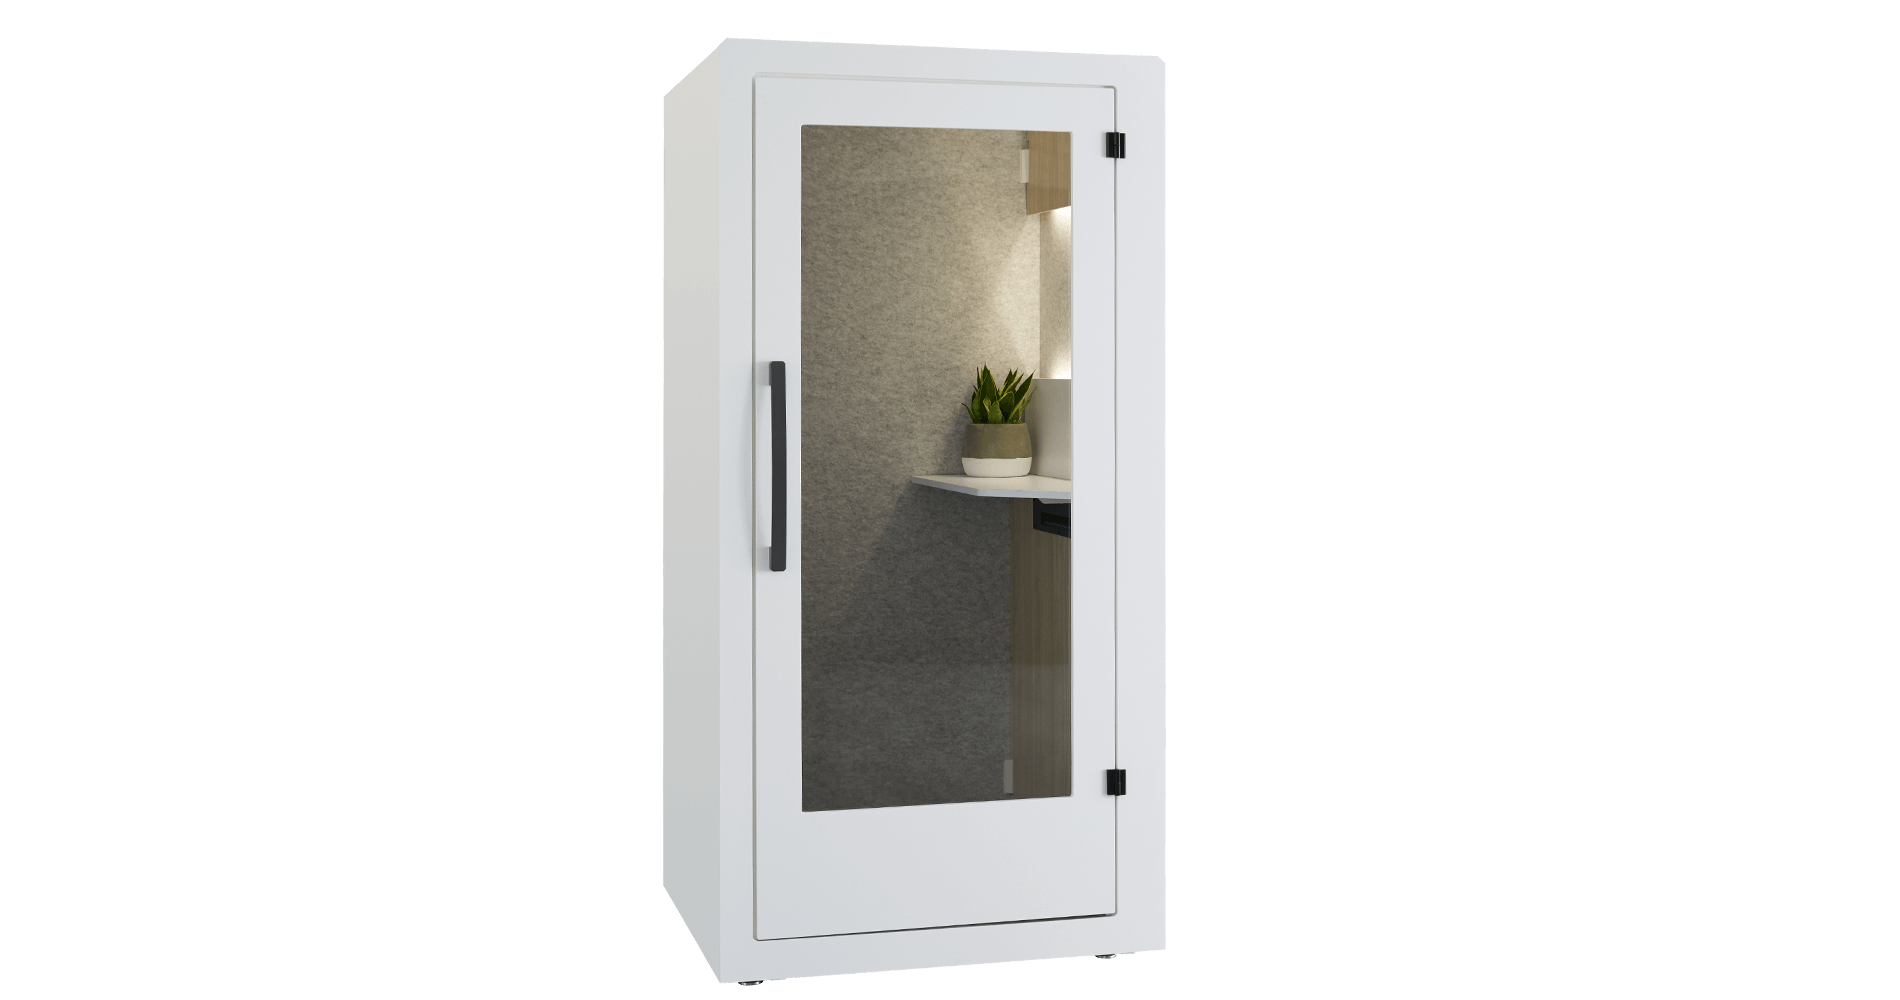 privacy booth